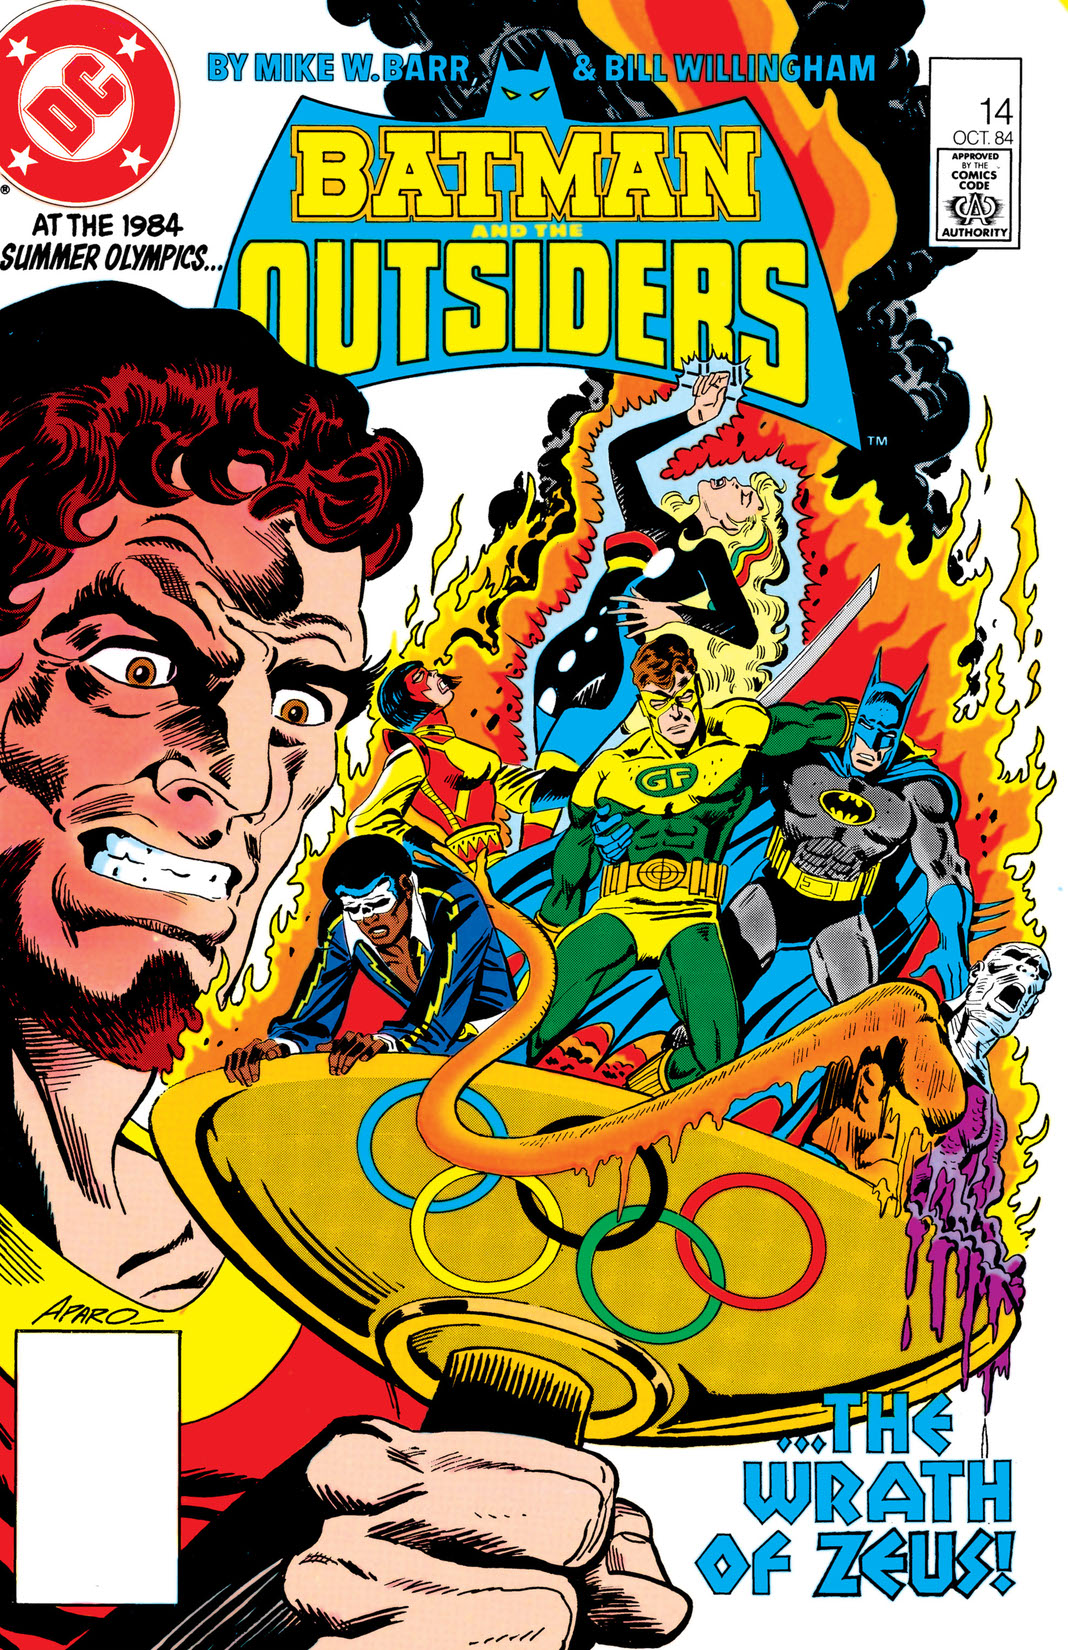 Batman and the Outsiders (1983-) #14 preview images